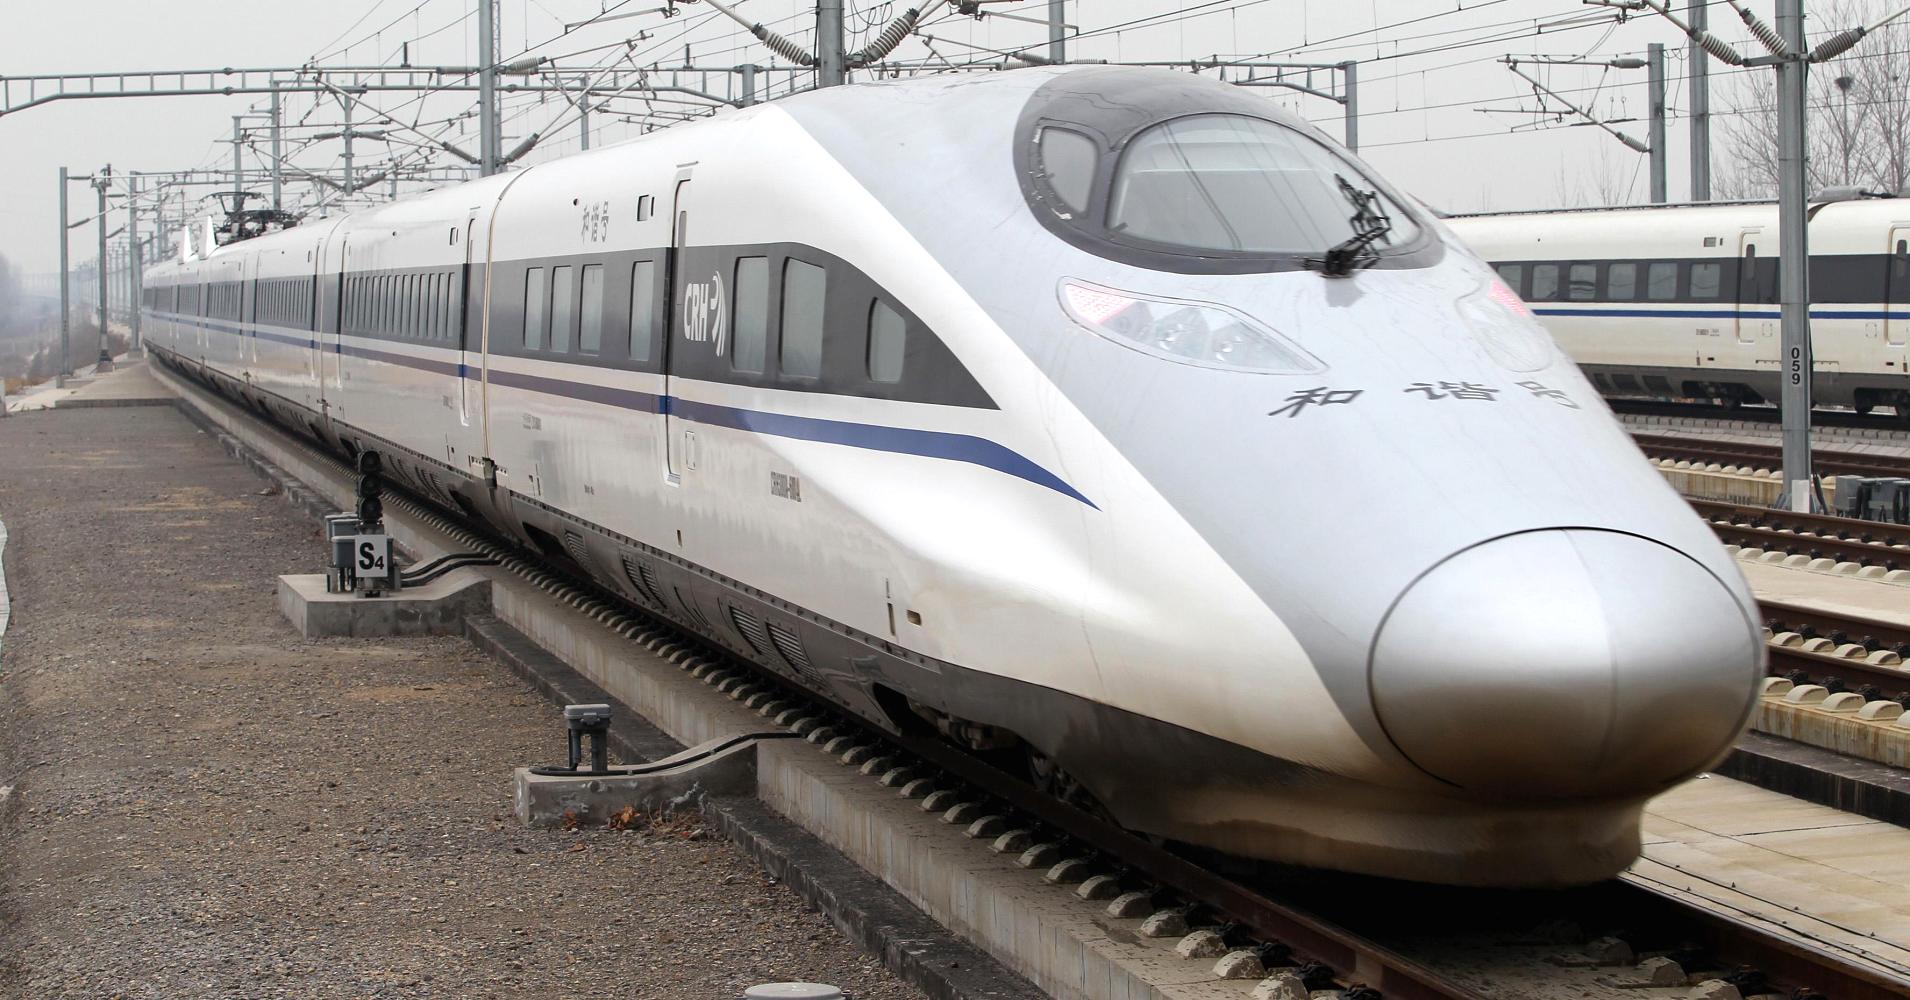 China Relaunches World's Fastest Train